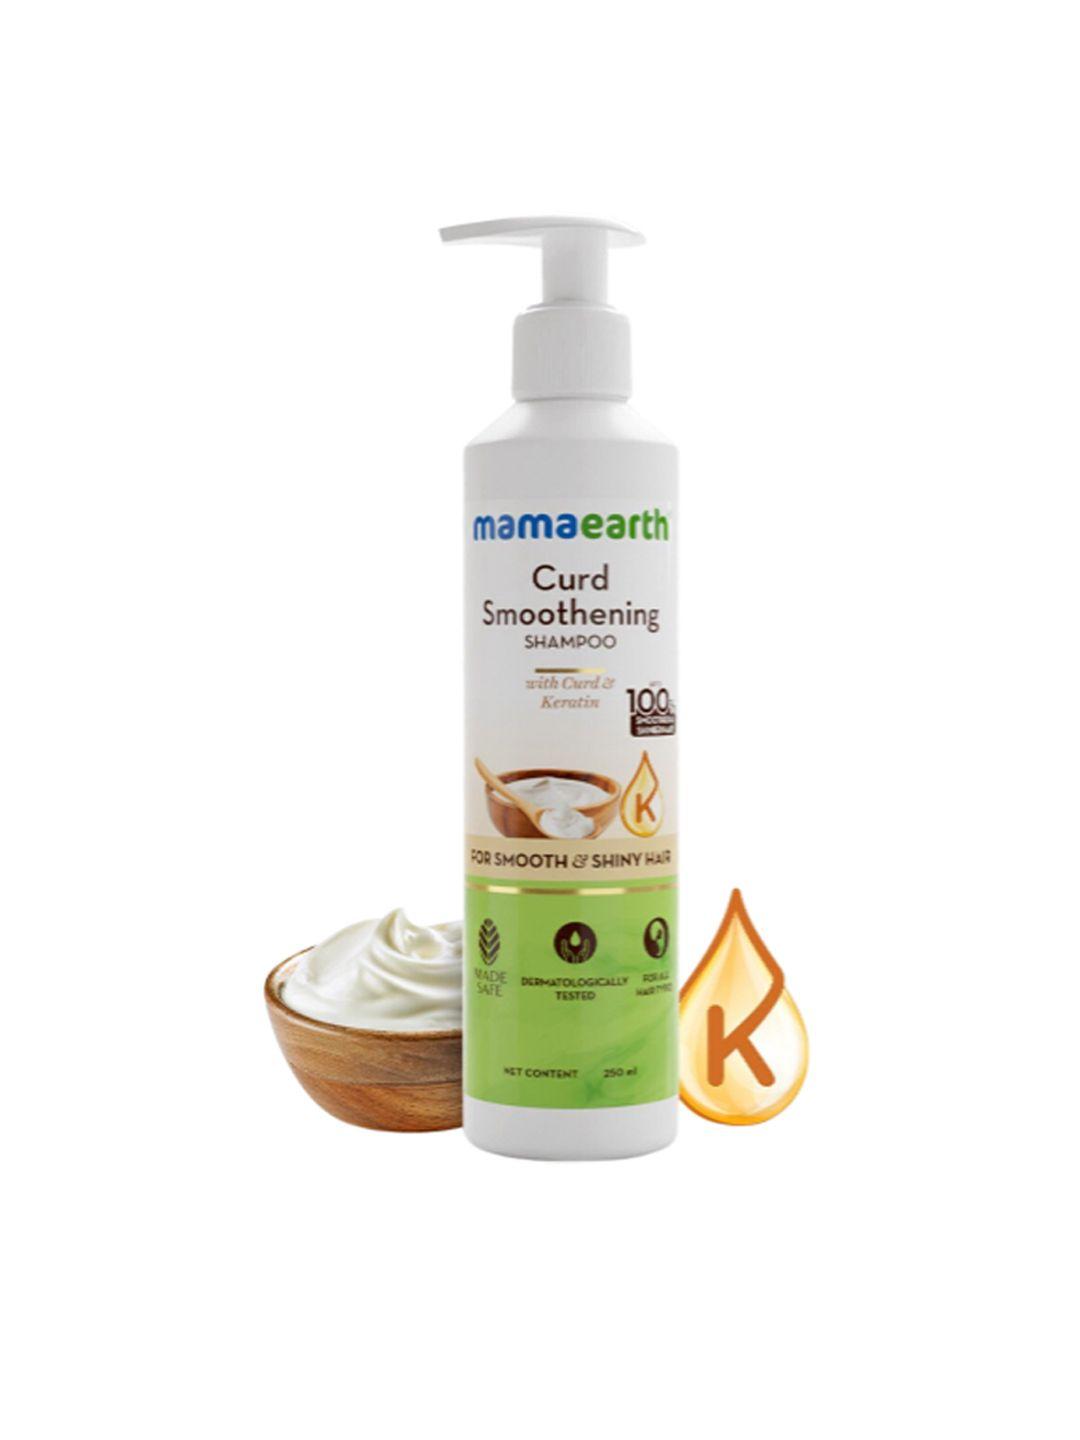 mamaearth curd smoothening shampoo with curd & keratin for smooth & shiny hair 250 ml